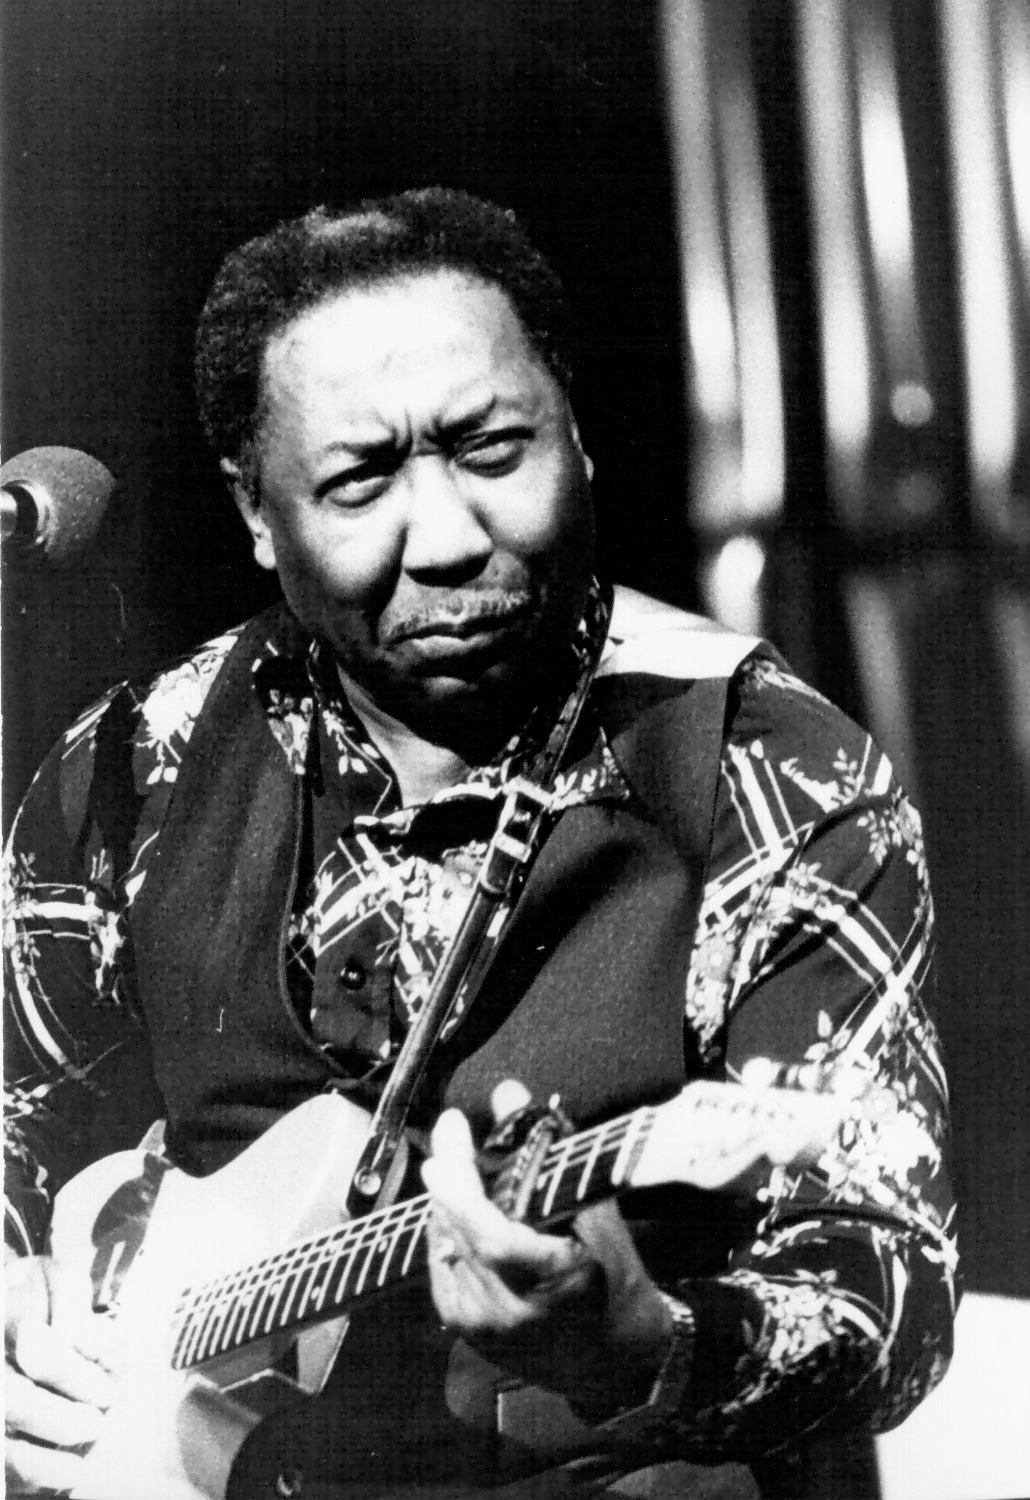 Muddy Waters performing. By Lionel Decoster - Own work, CC BY-SA 4.0, https://commons.wikimedia.org/w/index.php?curid=74824993